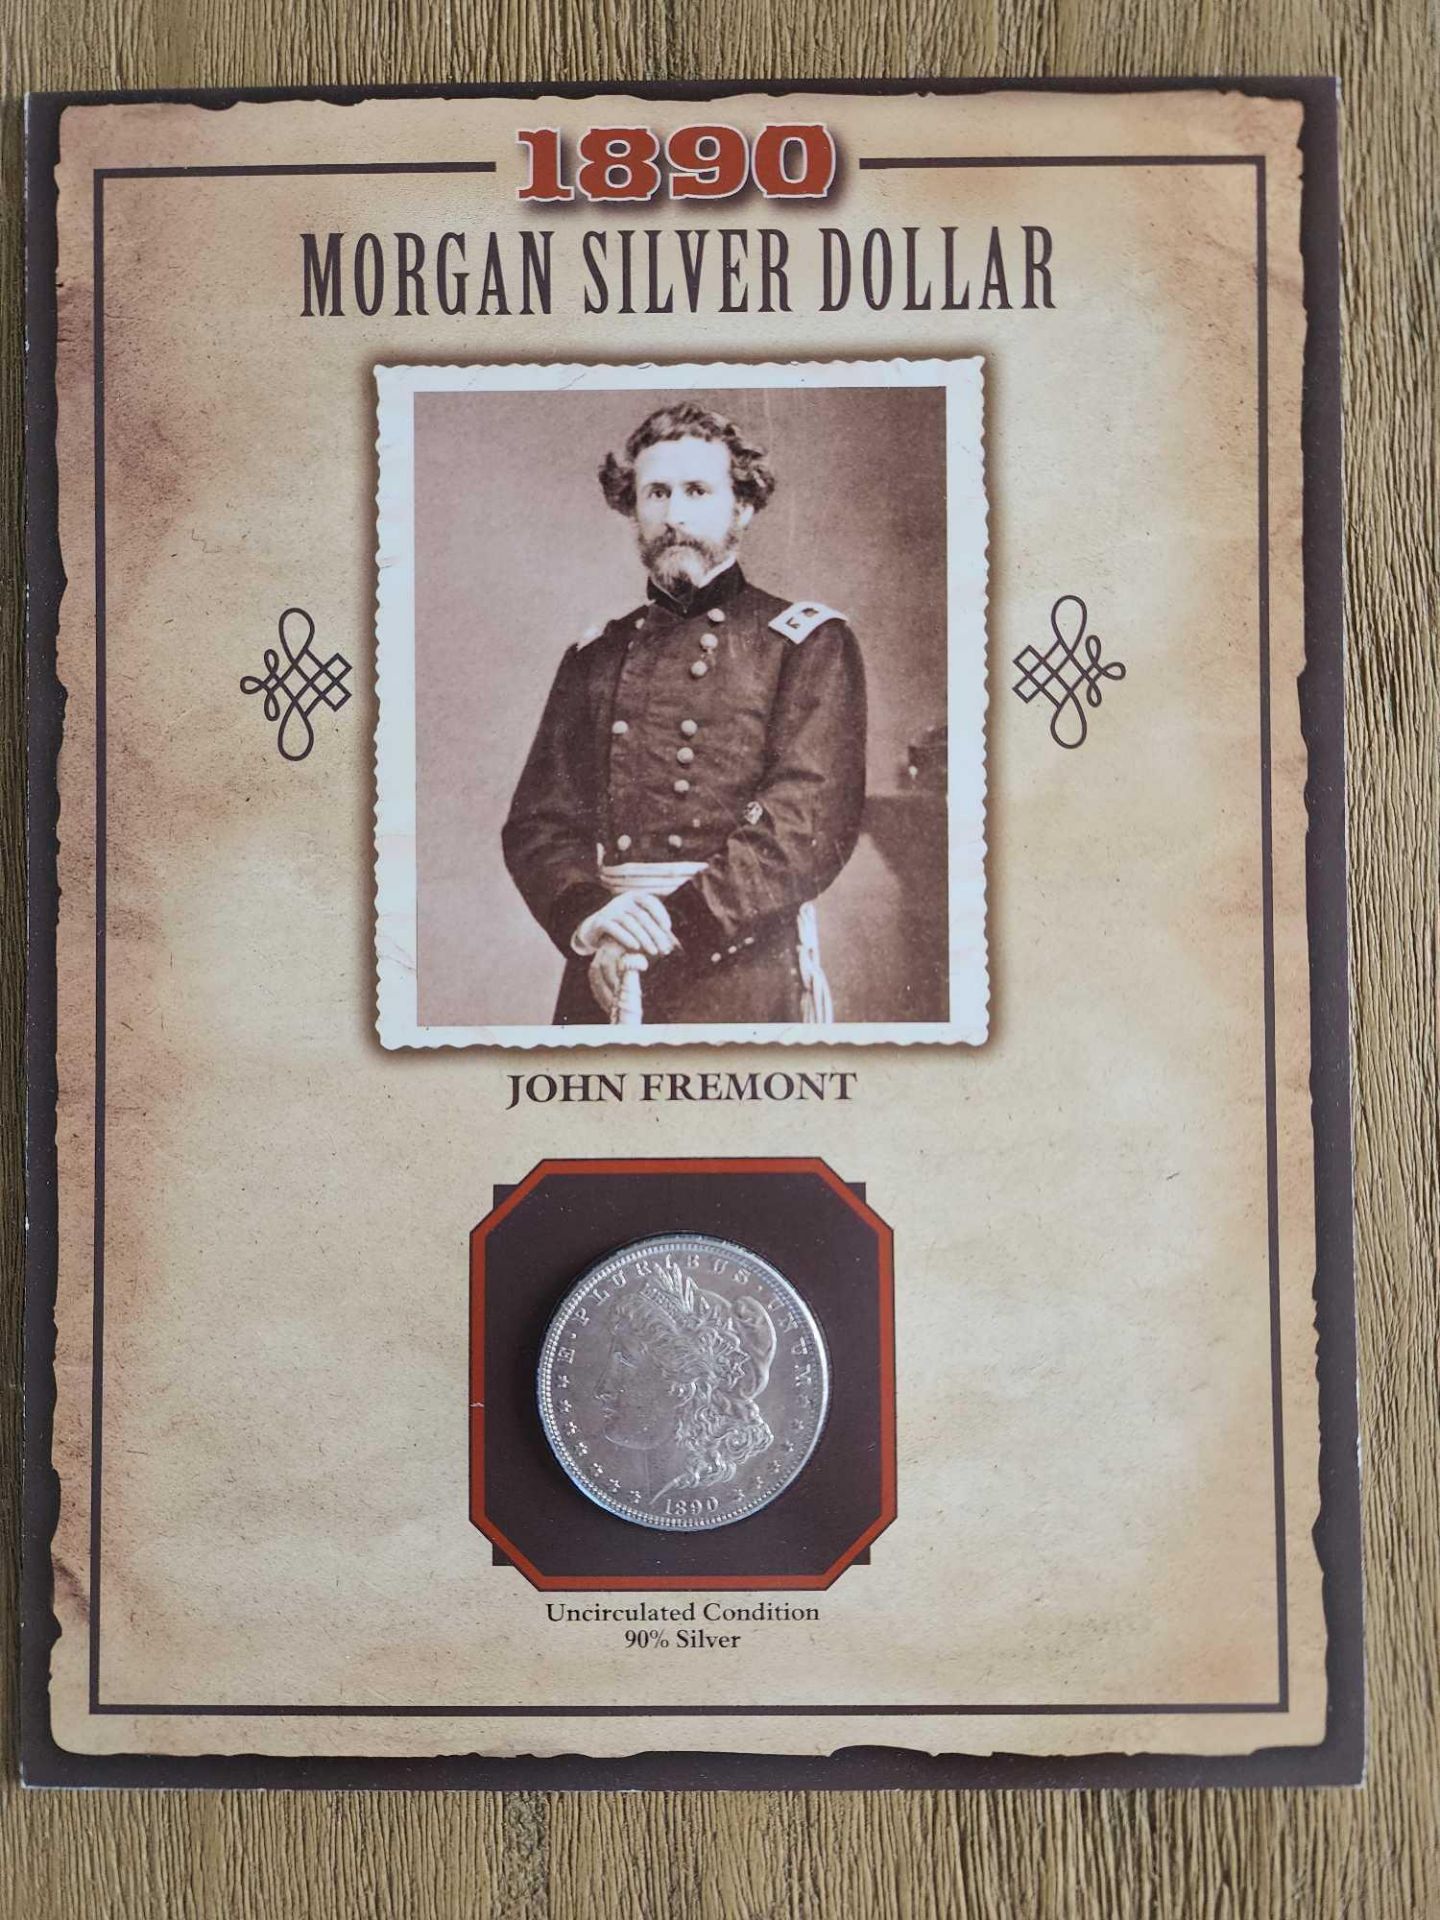 1890 Morgan Dollar Uncirculated condition with John Fremont Stamp and Facts - Image 2 of 10